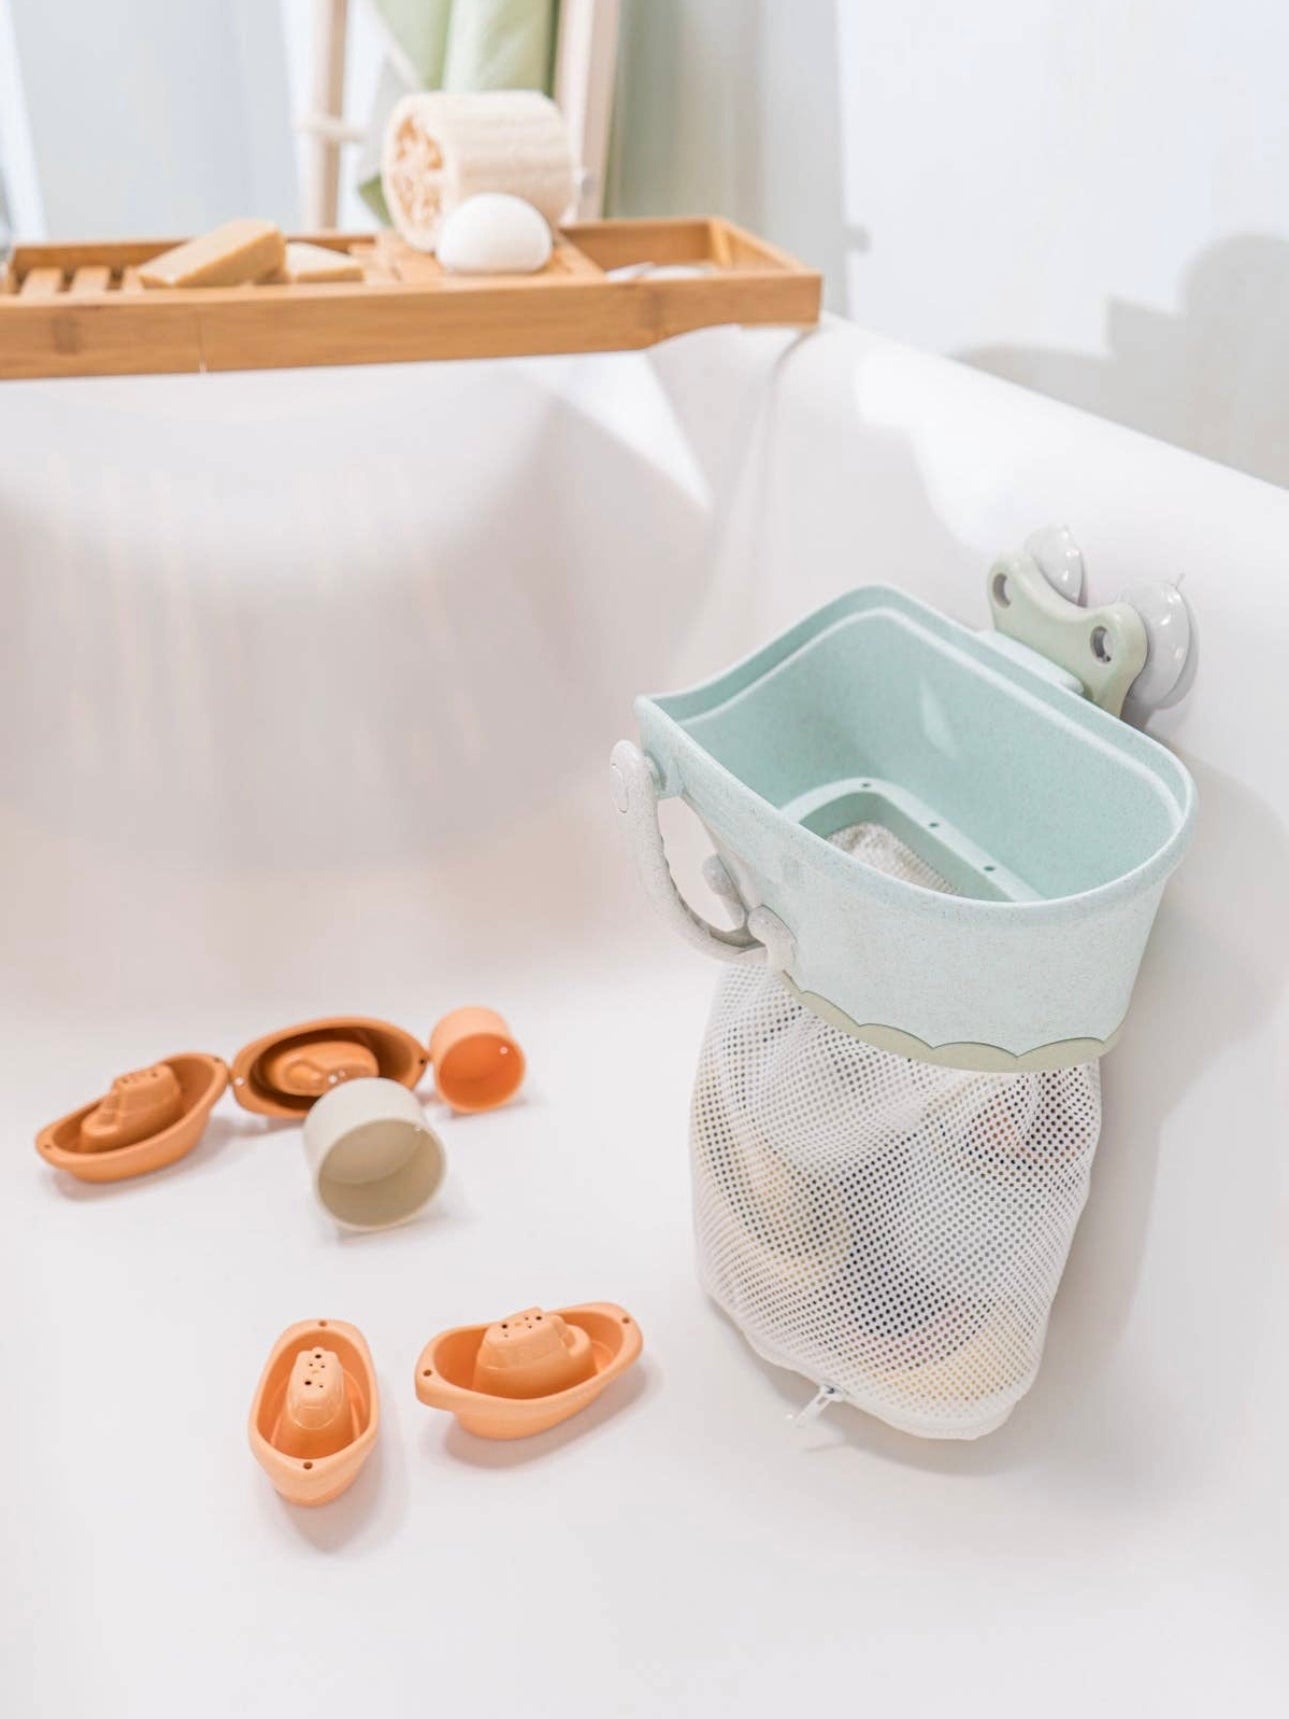 Bath Toy Organizer with Stackable Cups and Boats